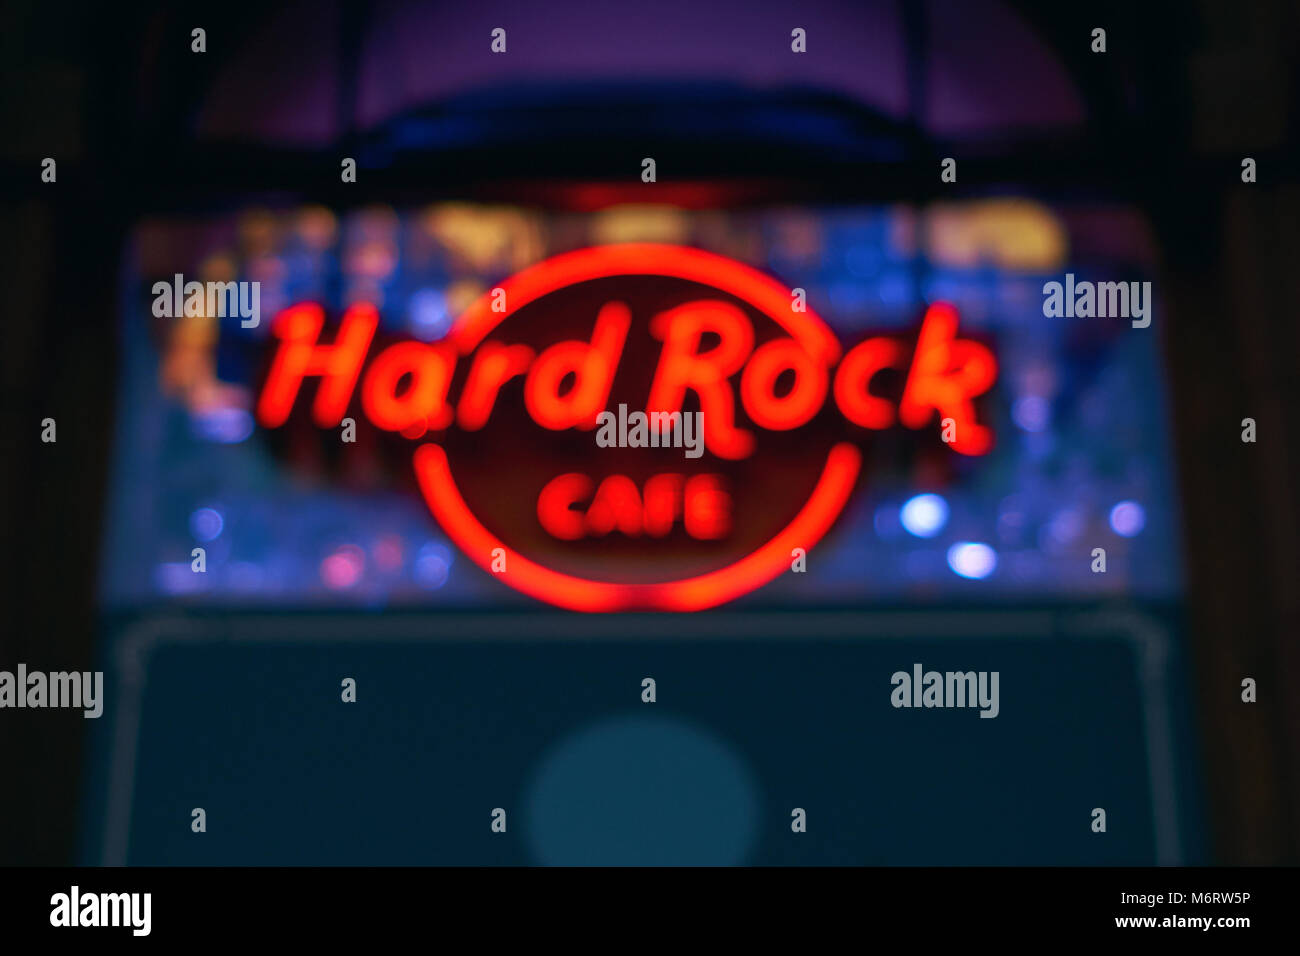 Blurred neon light of the logo of Hard Rock cafe at night. Stock Photo